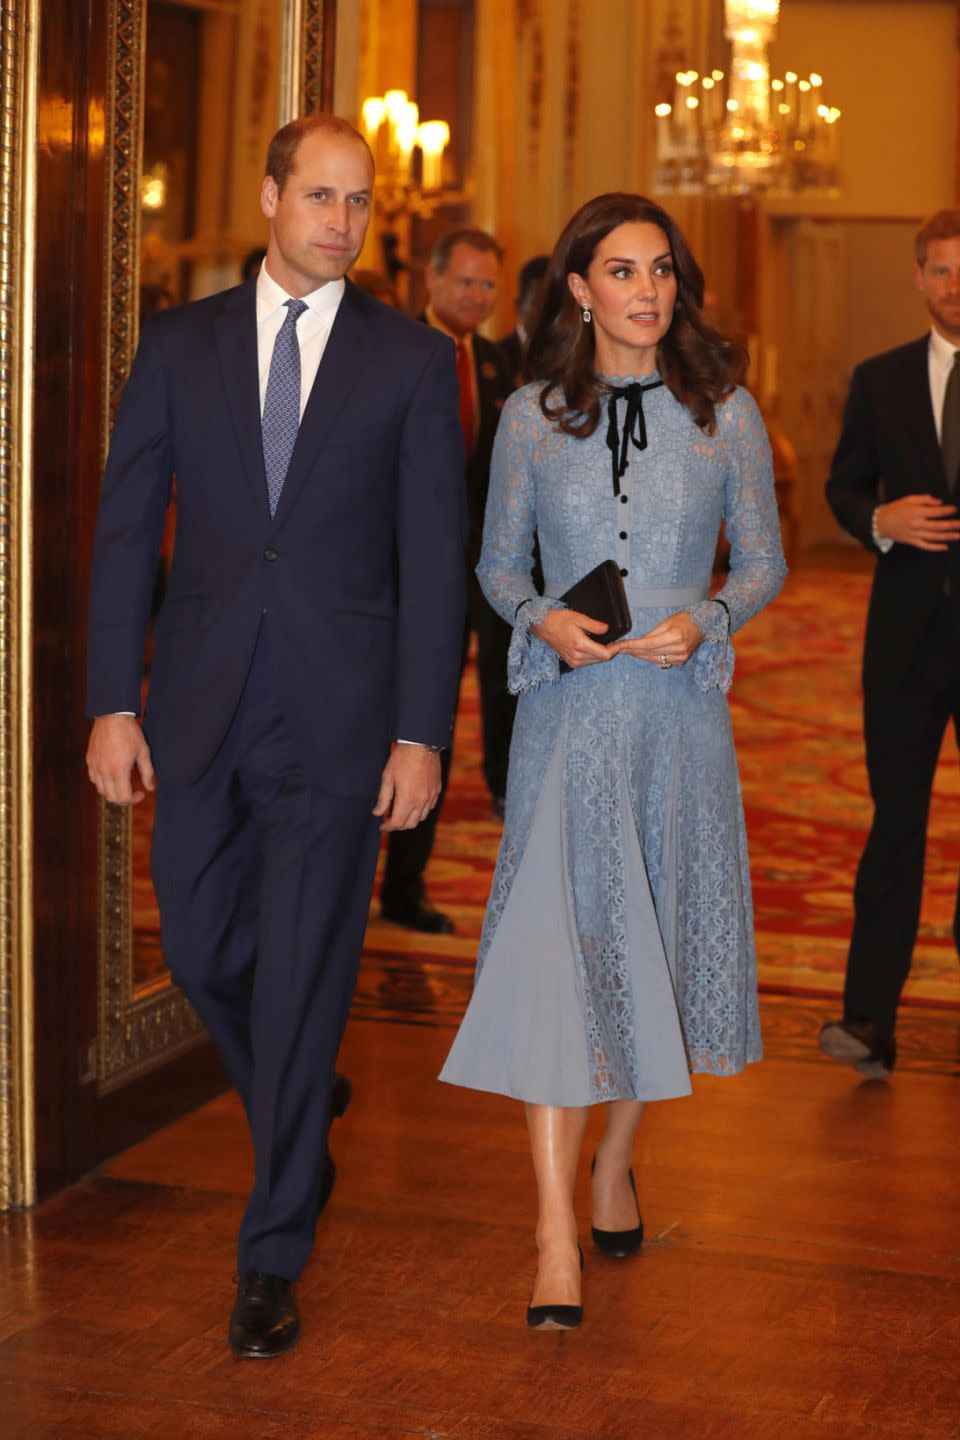 She appeared at the reception alongside her husband, Prince William. Photo: Getty Images